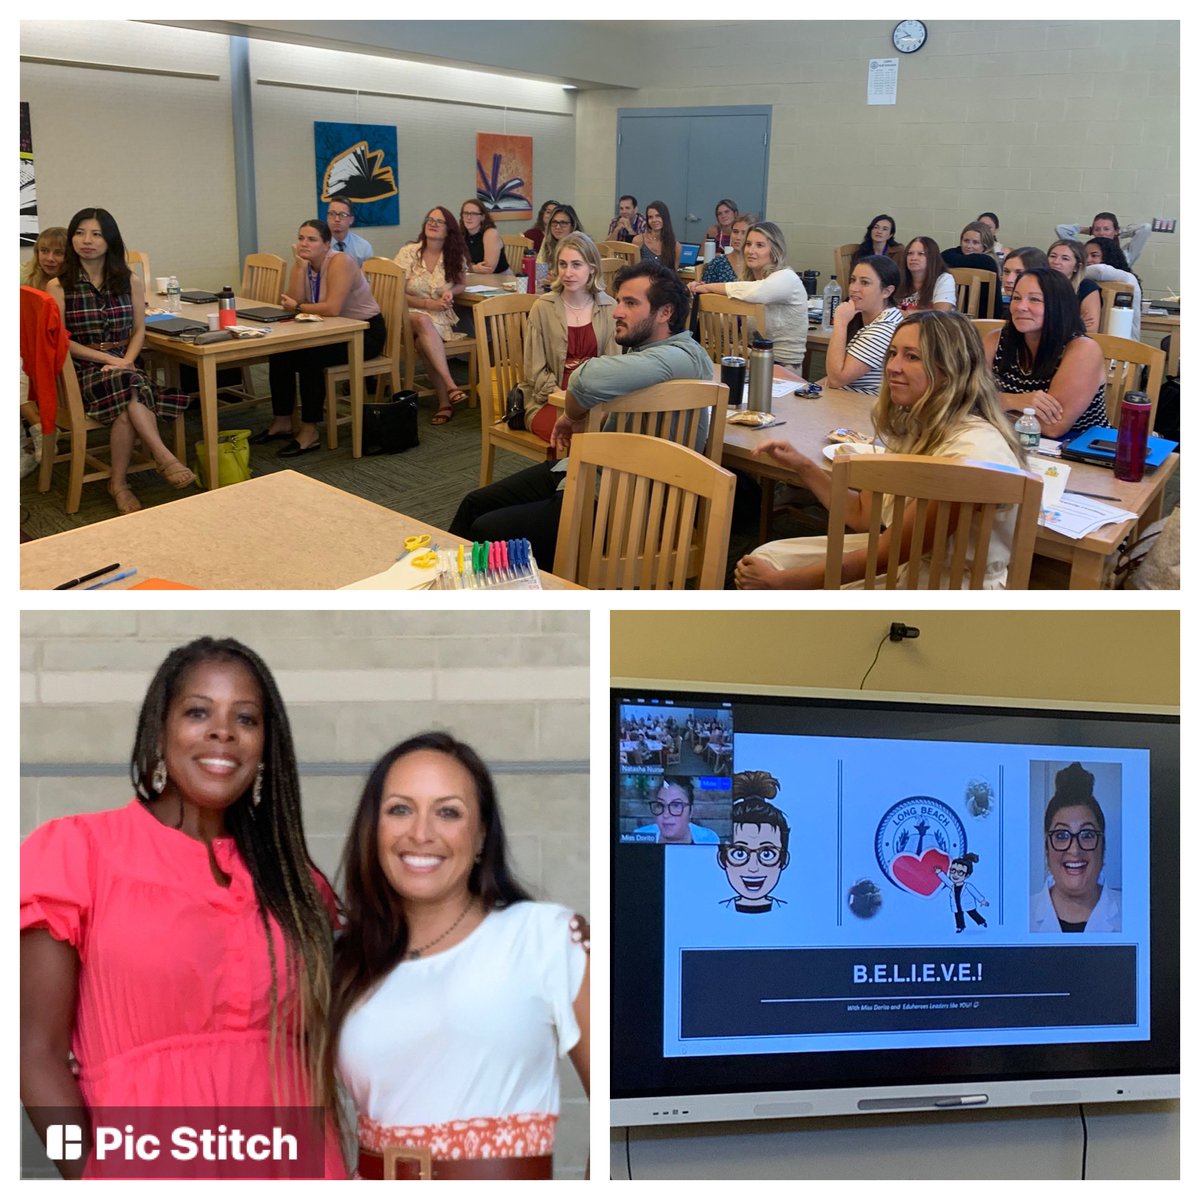 Welcomed these beautiful people today at new teacher orientation! Honored to be able to team up w/@natasha_nurse & work w/this group of #EmergingLeaders!🎉Shout out & TY to @Dorina_BELIEVE for your words of wisdom & inspiration! @Jostroff2 @LBSchoolsNY #LBLeads #ProudtoBeLB